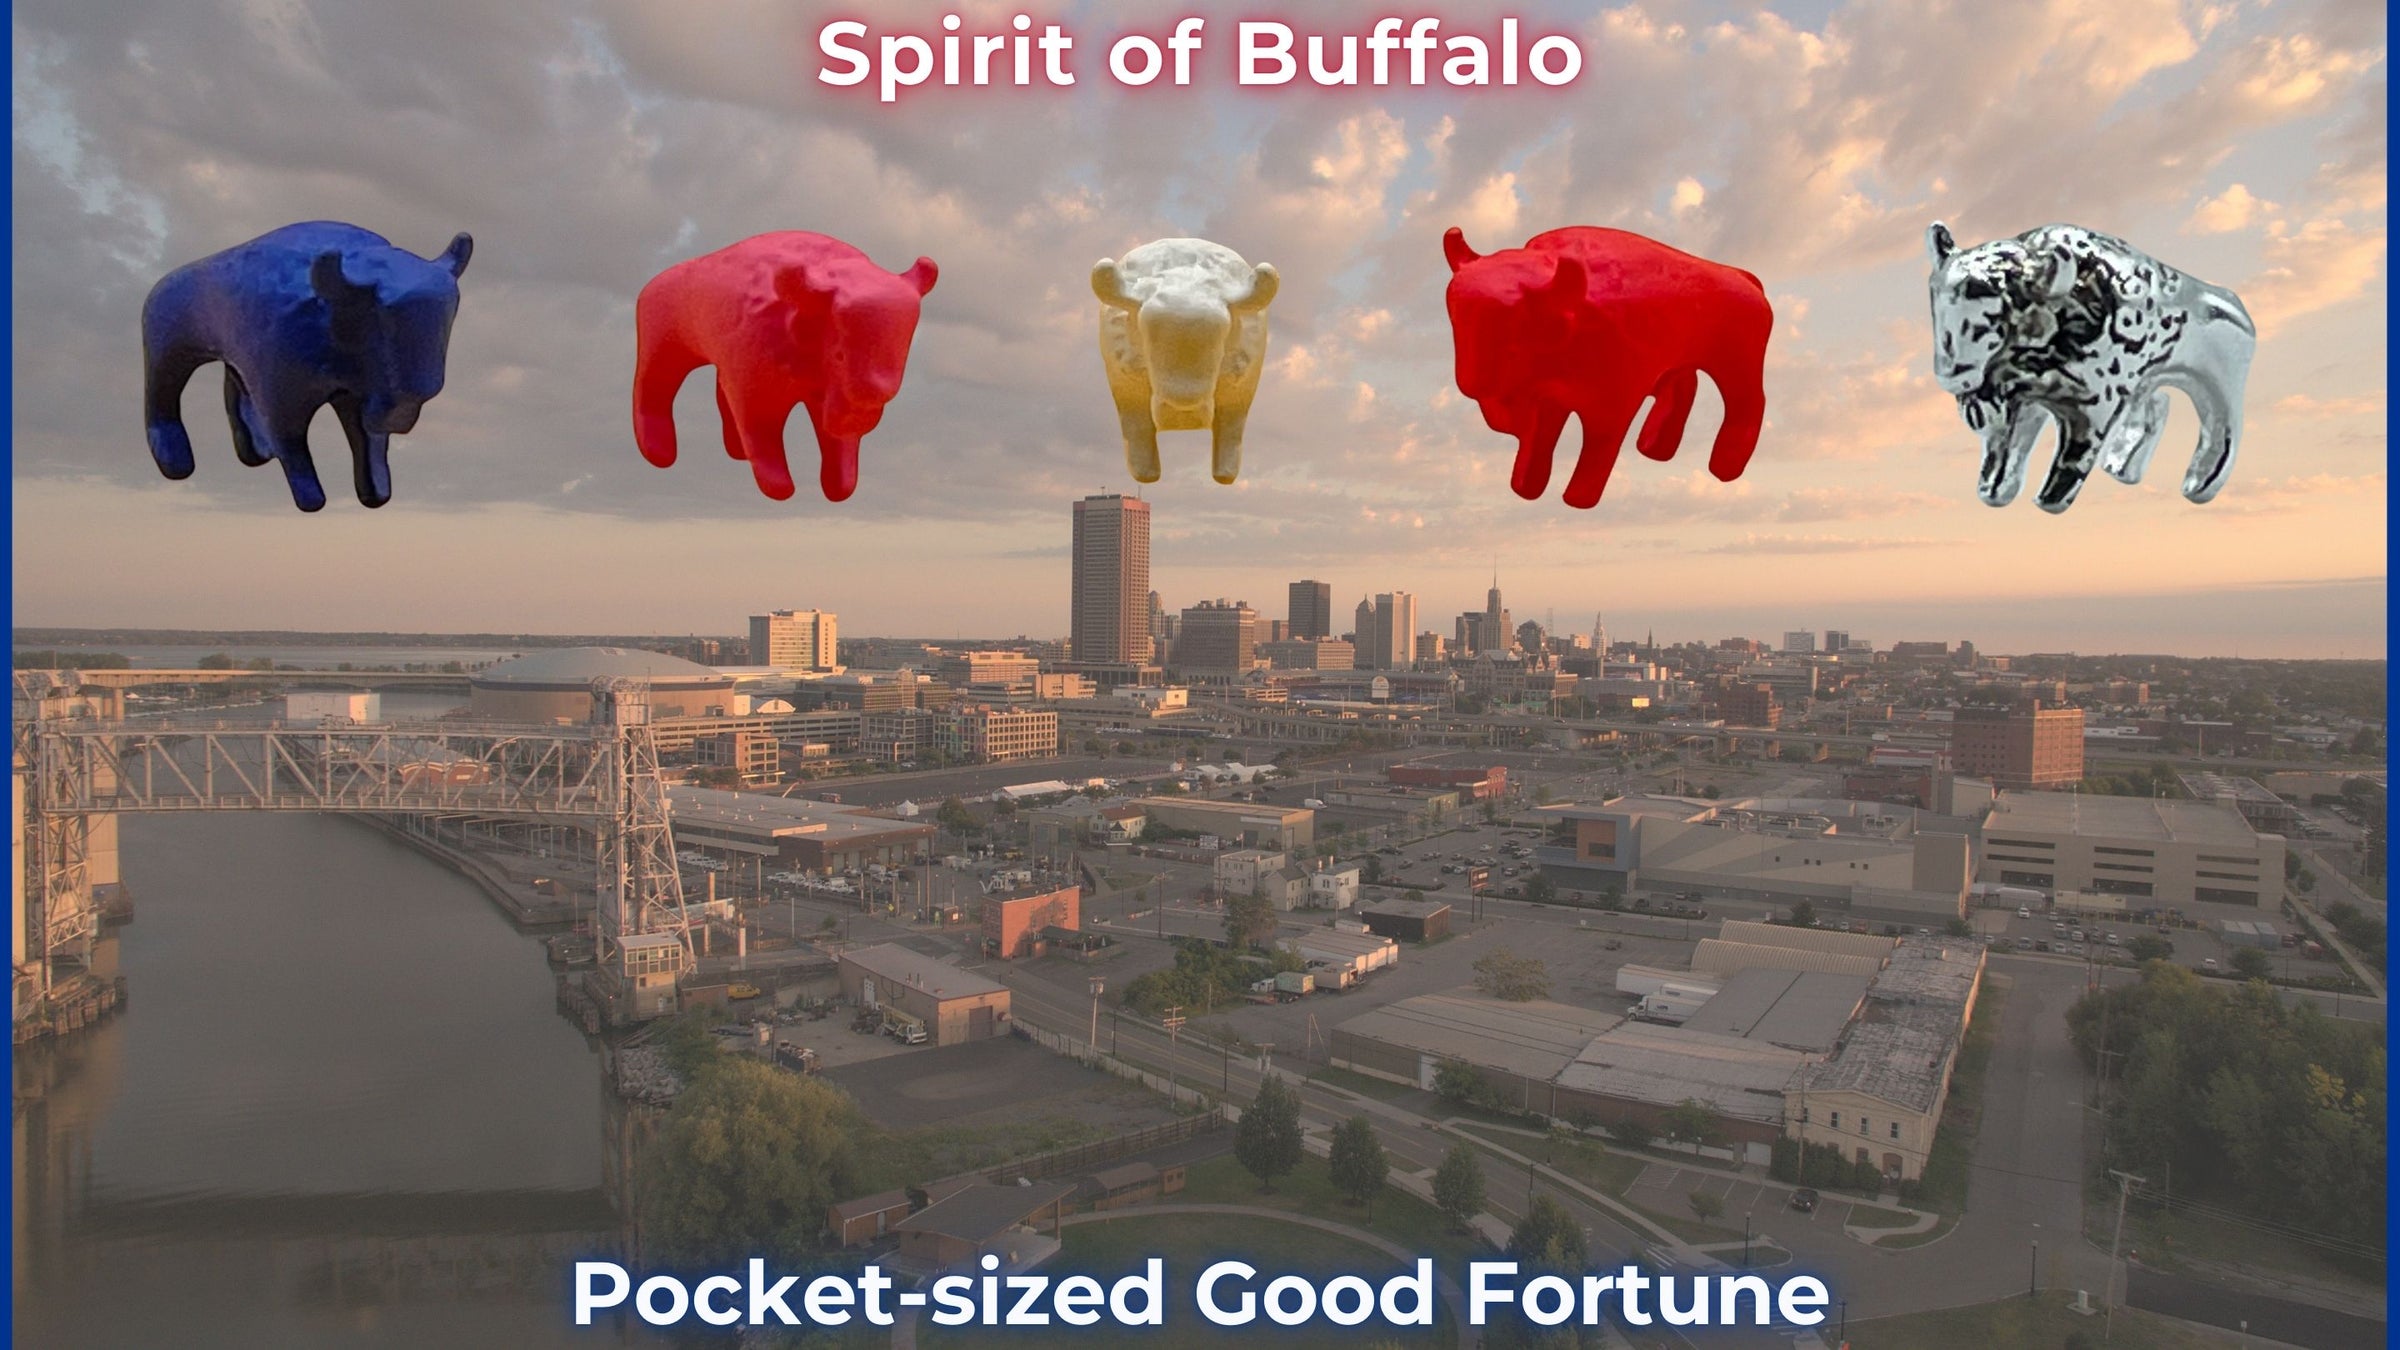 Collection of Lucky Little Buffalo figurines in various colors, symbolizing strength, resilience, and good fortune, perfect as unique Buffalo Bills gifts.